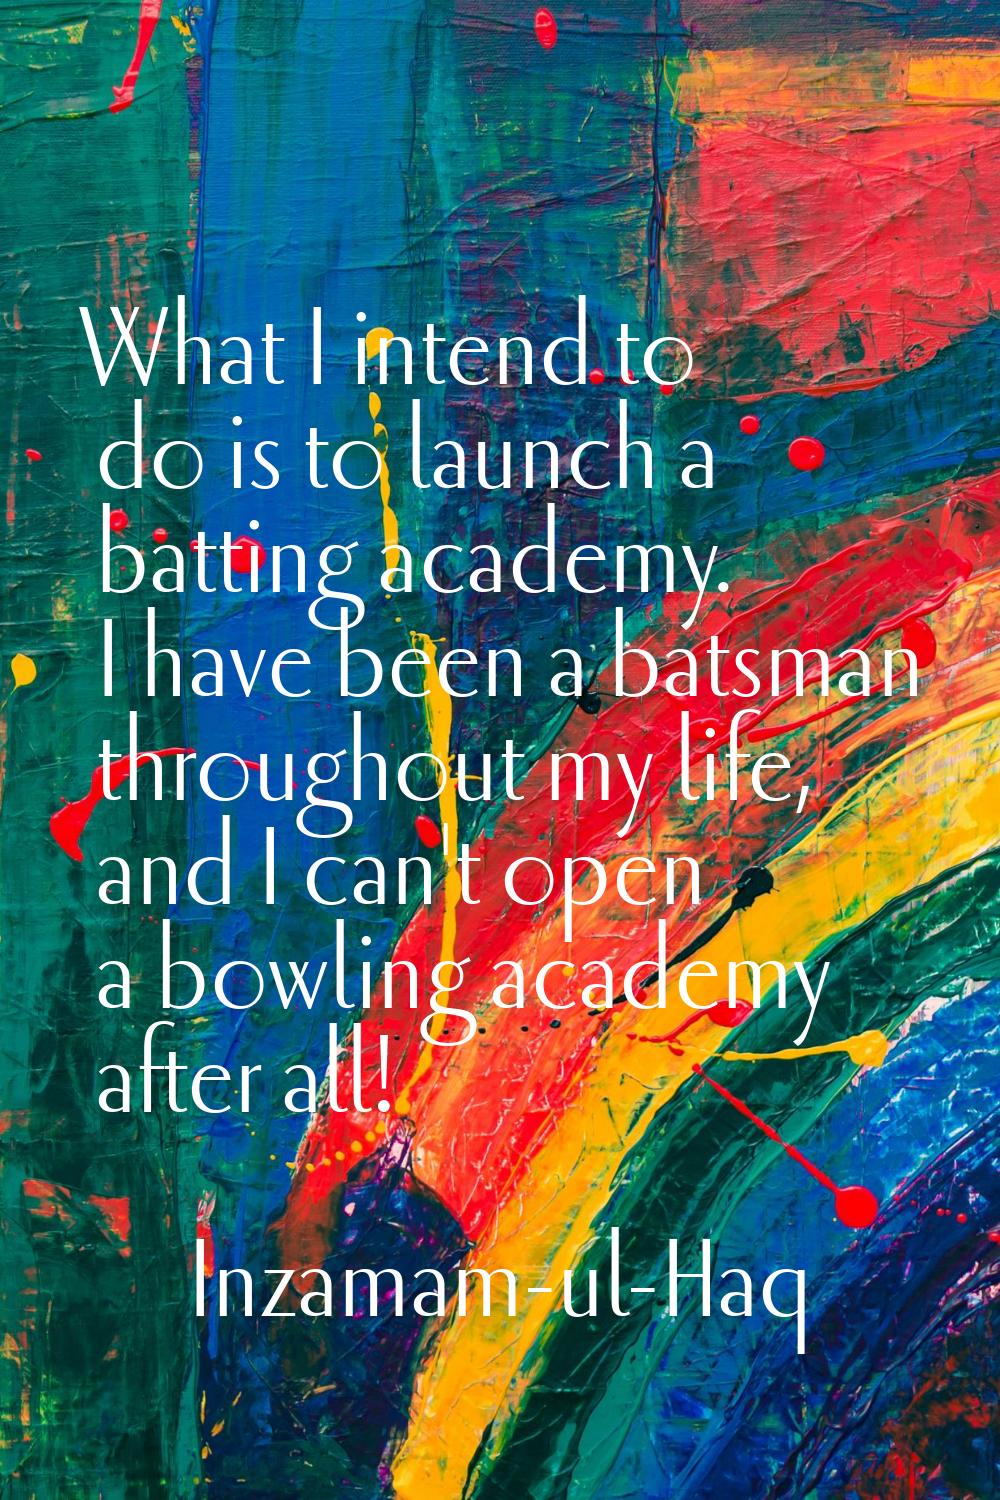 What I intend to do is to launch a batting academy. I have been a batsman throughout my life, and I